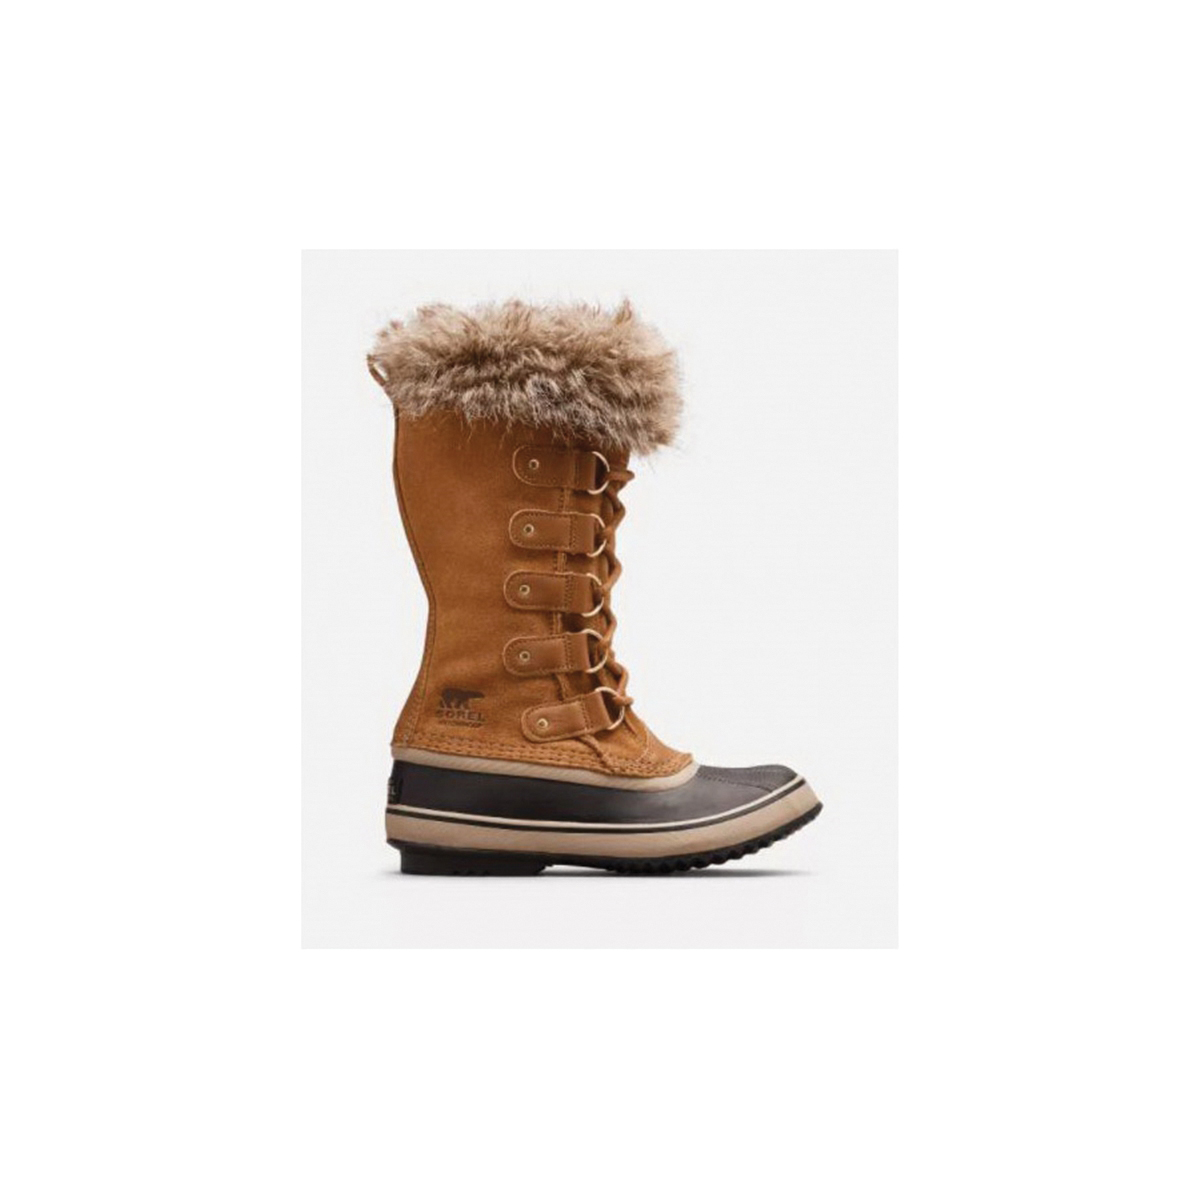 Sorel Joan Of Arctic Series 1855131-224-11 Boots, 11, Black/Camel Brown, Faux Fur/Suede, Lace, Insulated - 1